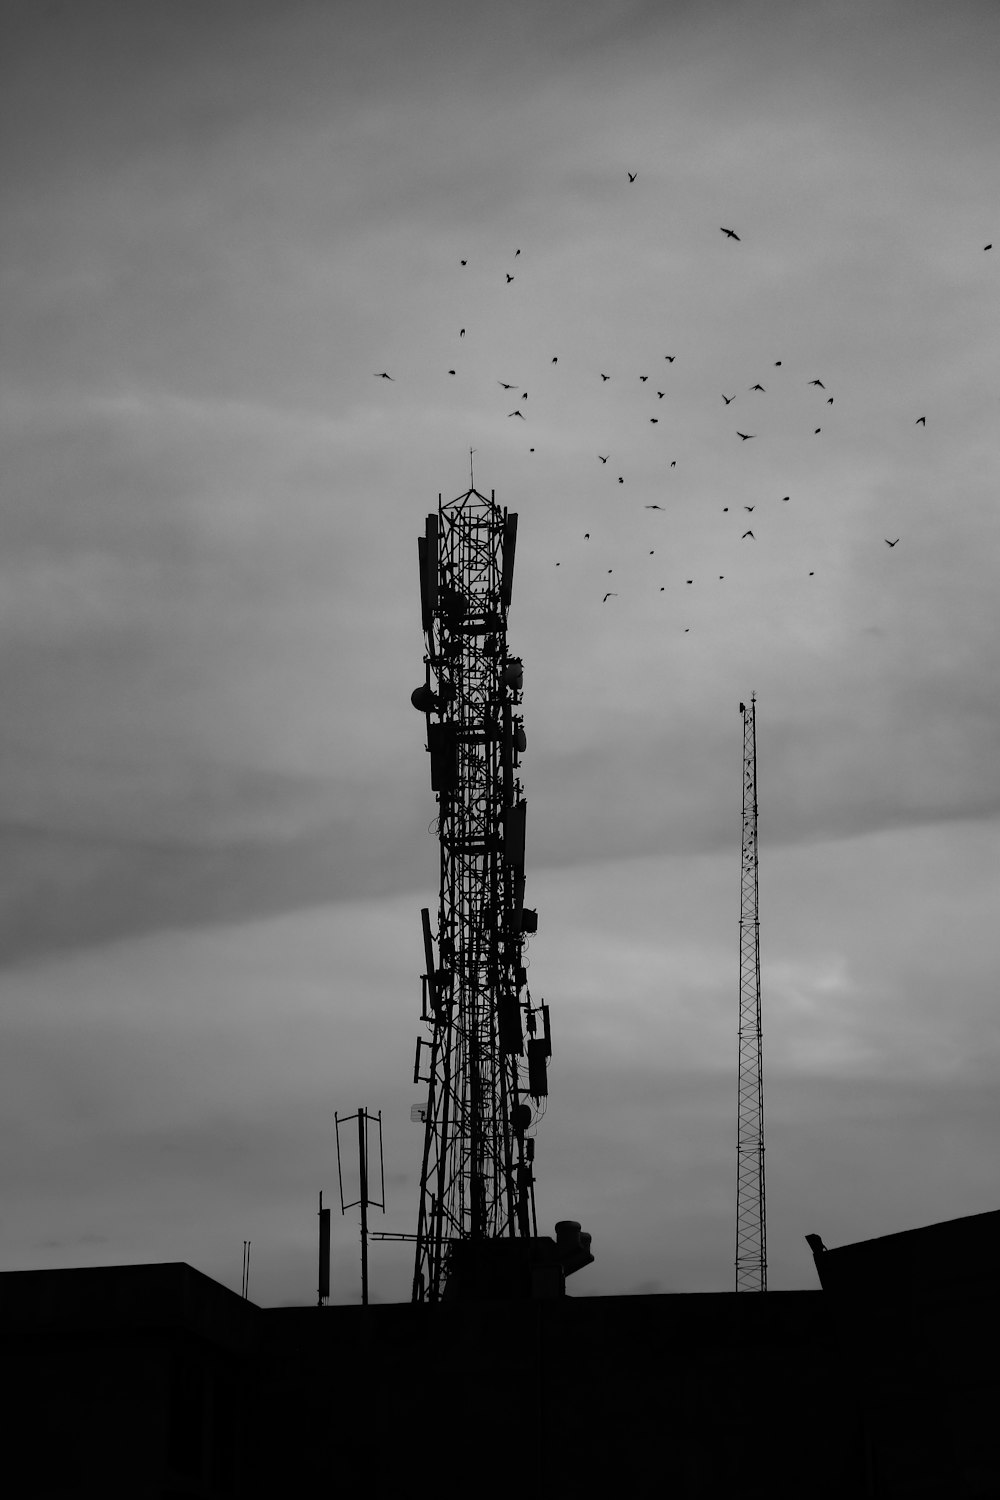 grayscale photography of flock of birds flying over the crane tower